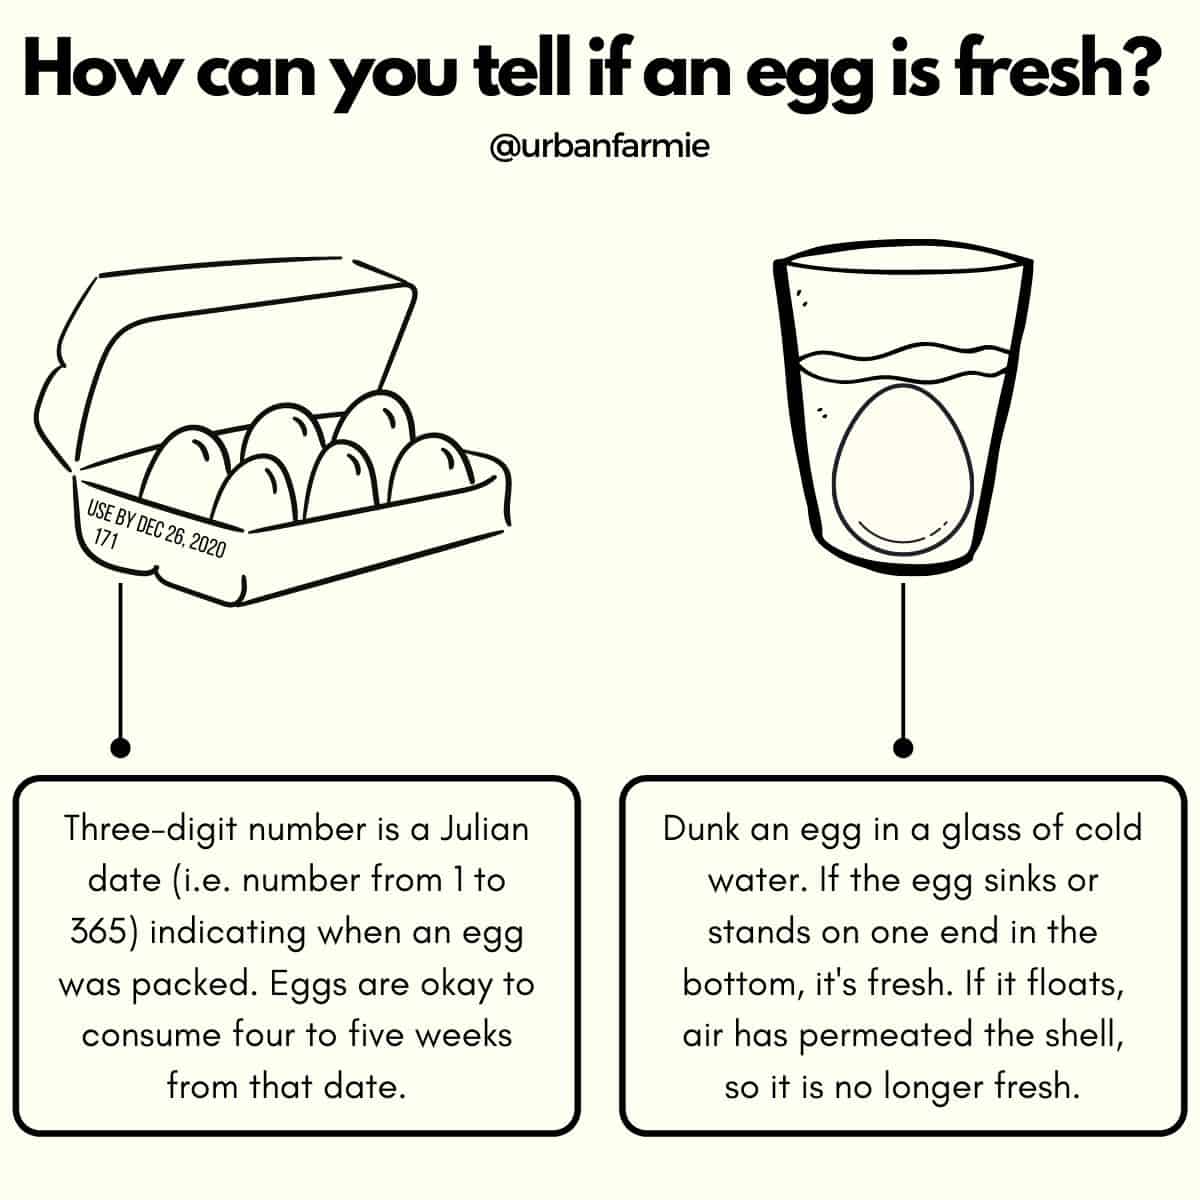 Infographic showing how to tell if egg is fresh